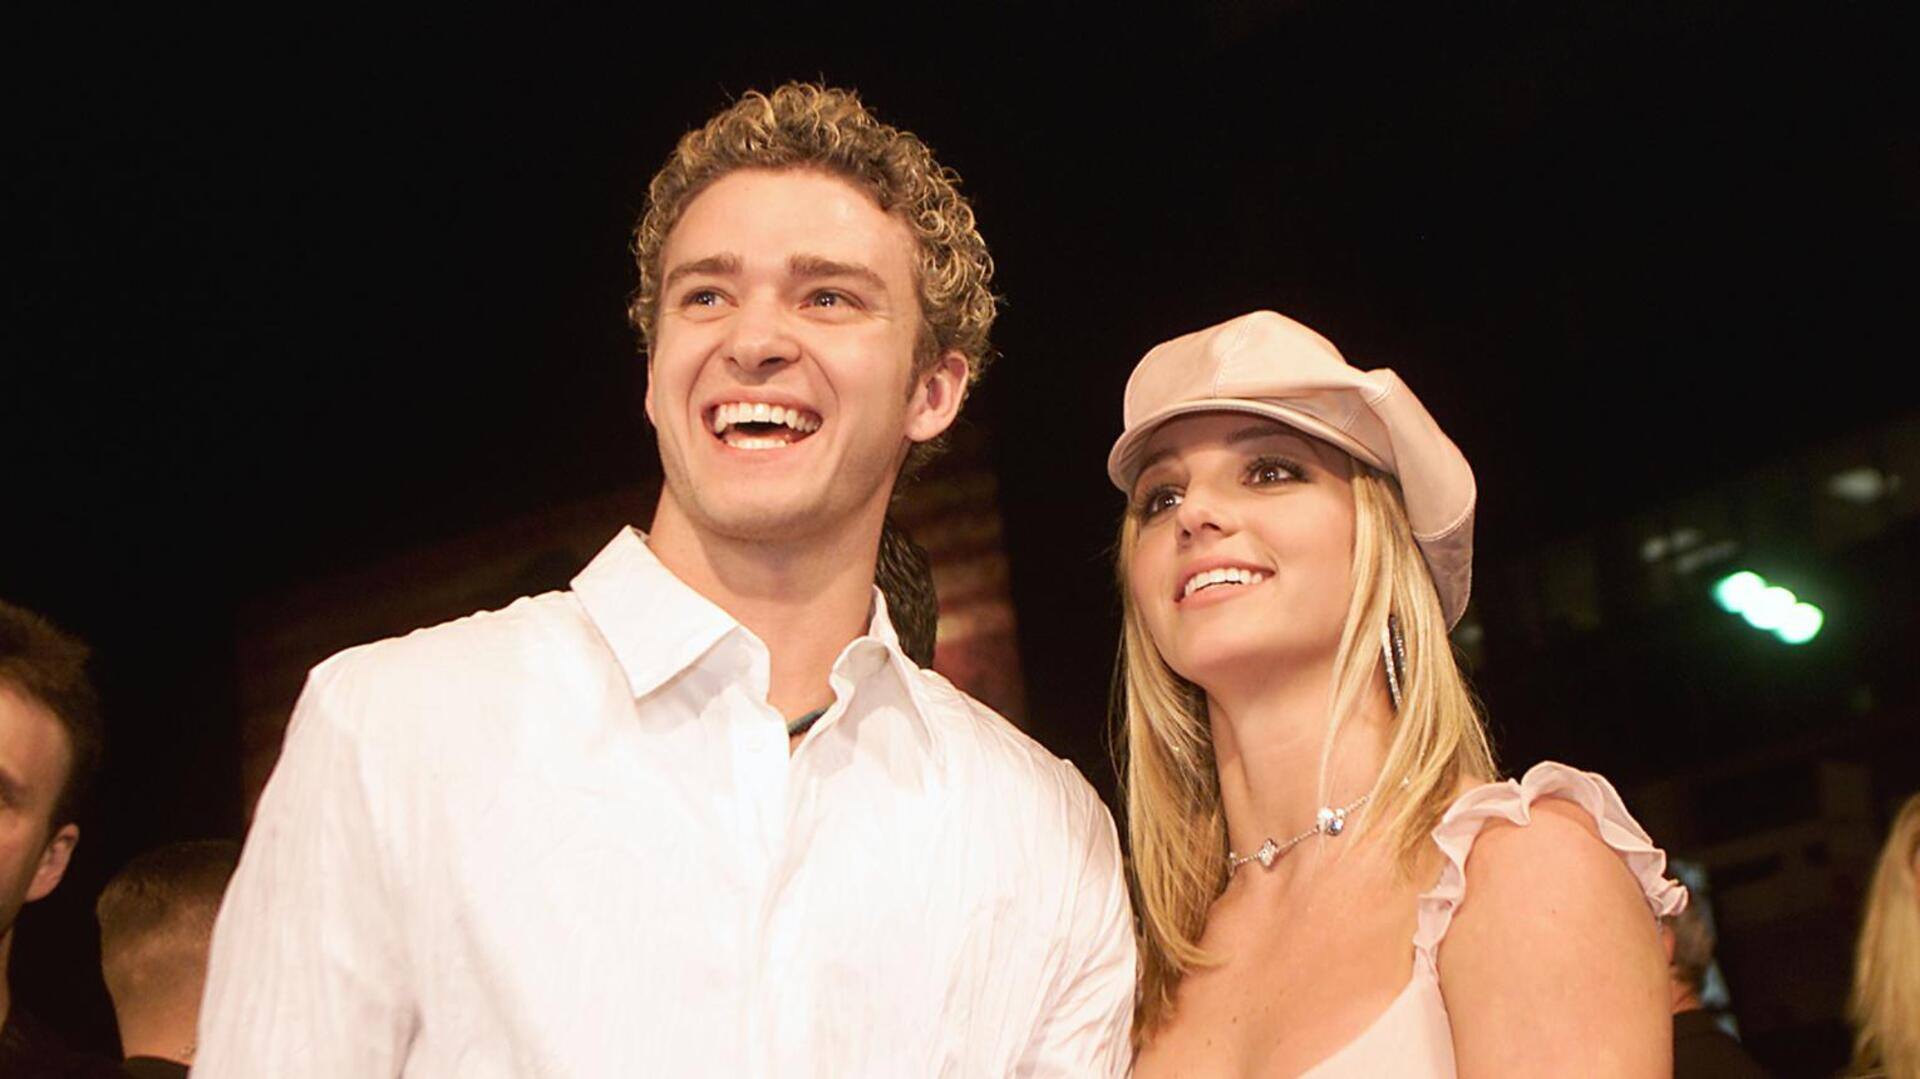 Most explosive revelations made by Britney Spears against Justin Timberlake